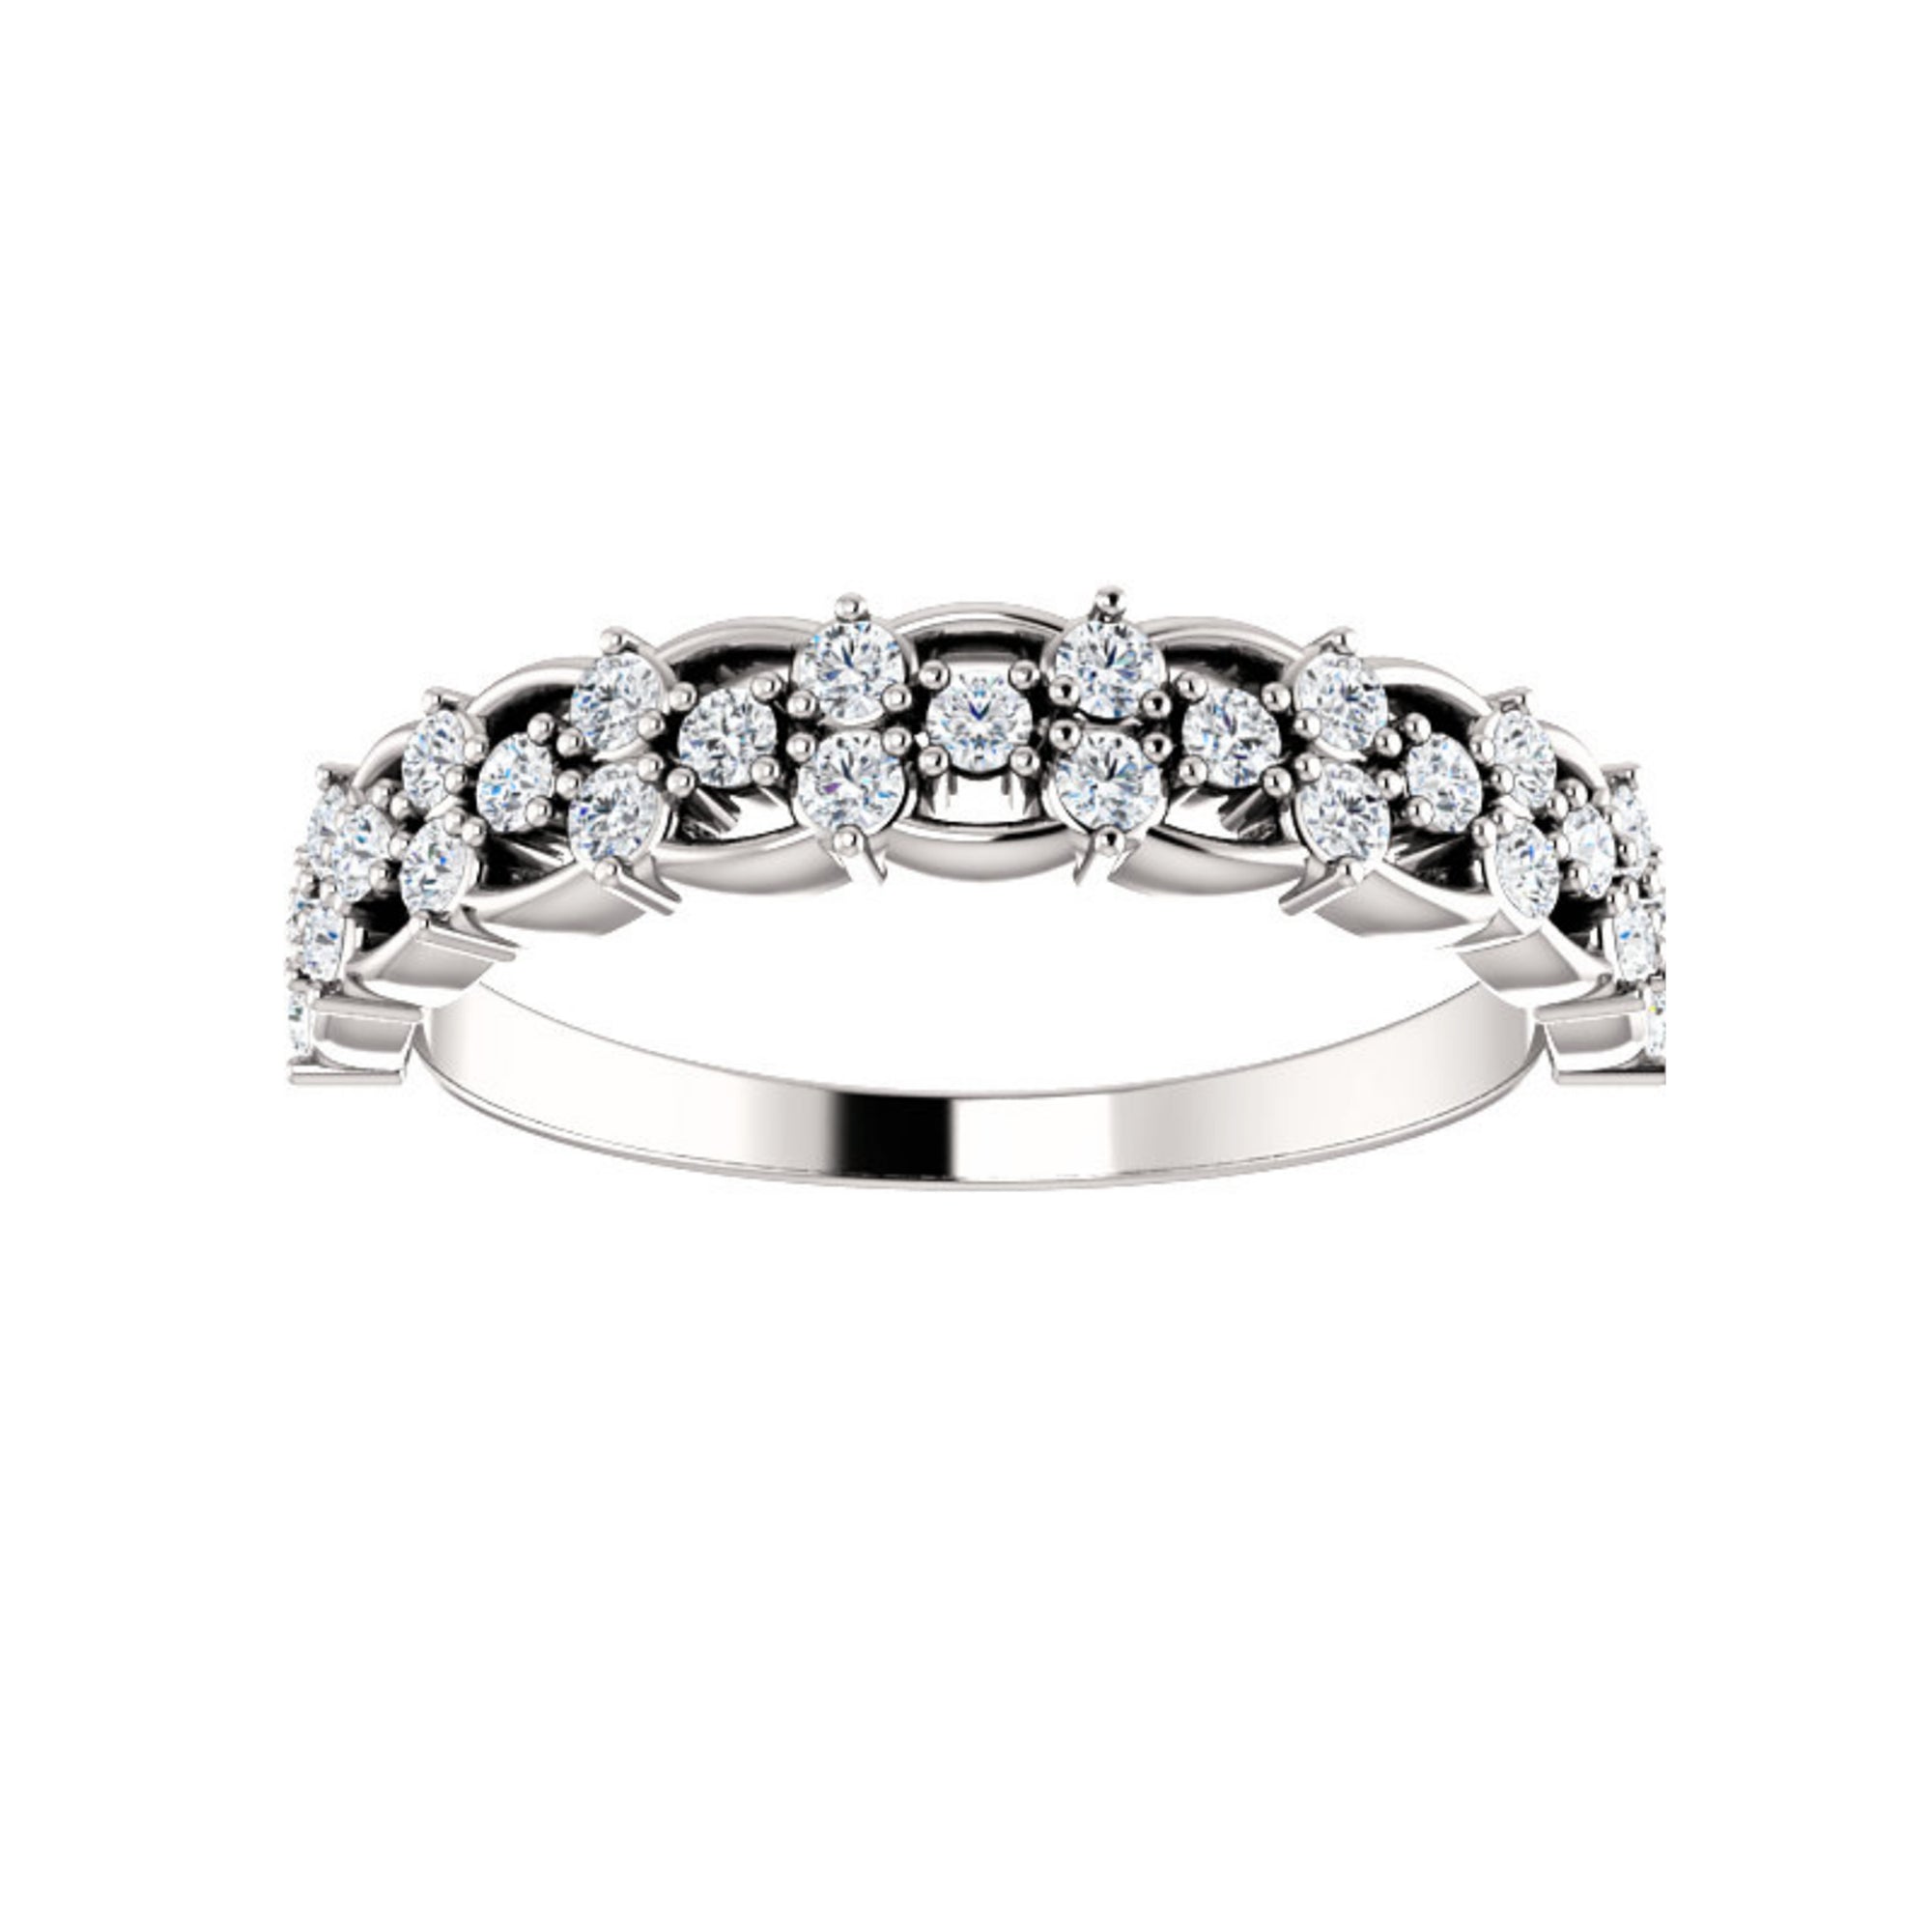 Diamond Felicity Stacking Band in White, Yellow or Rose Gold - Talisman Collection Fine Jewelers